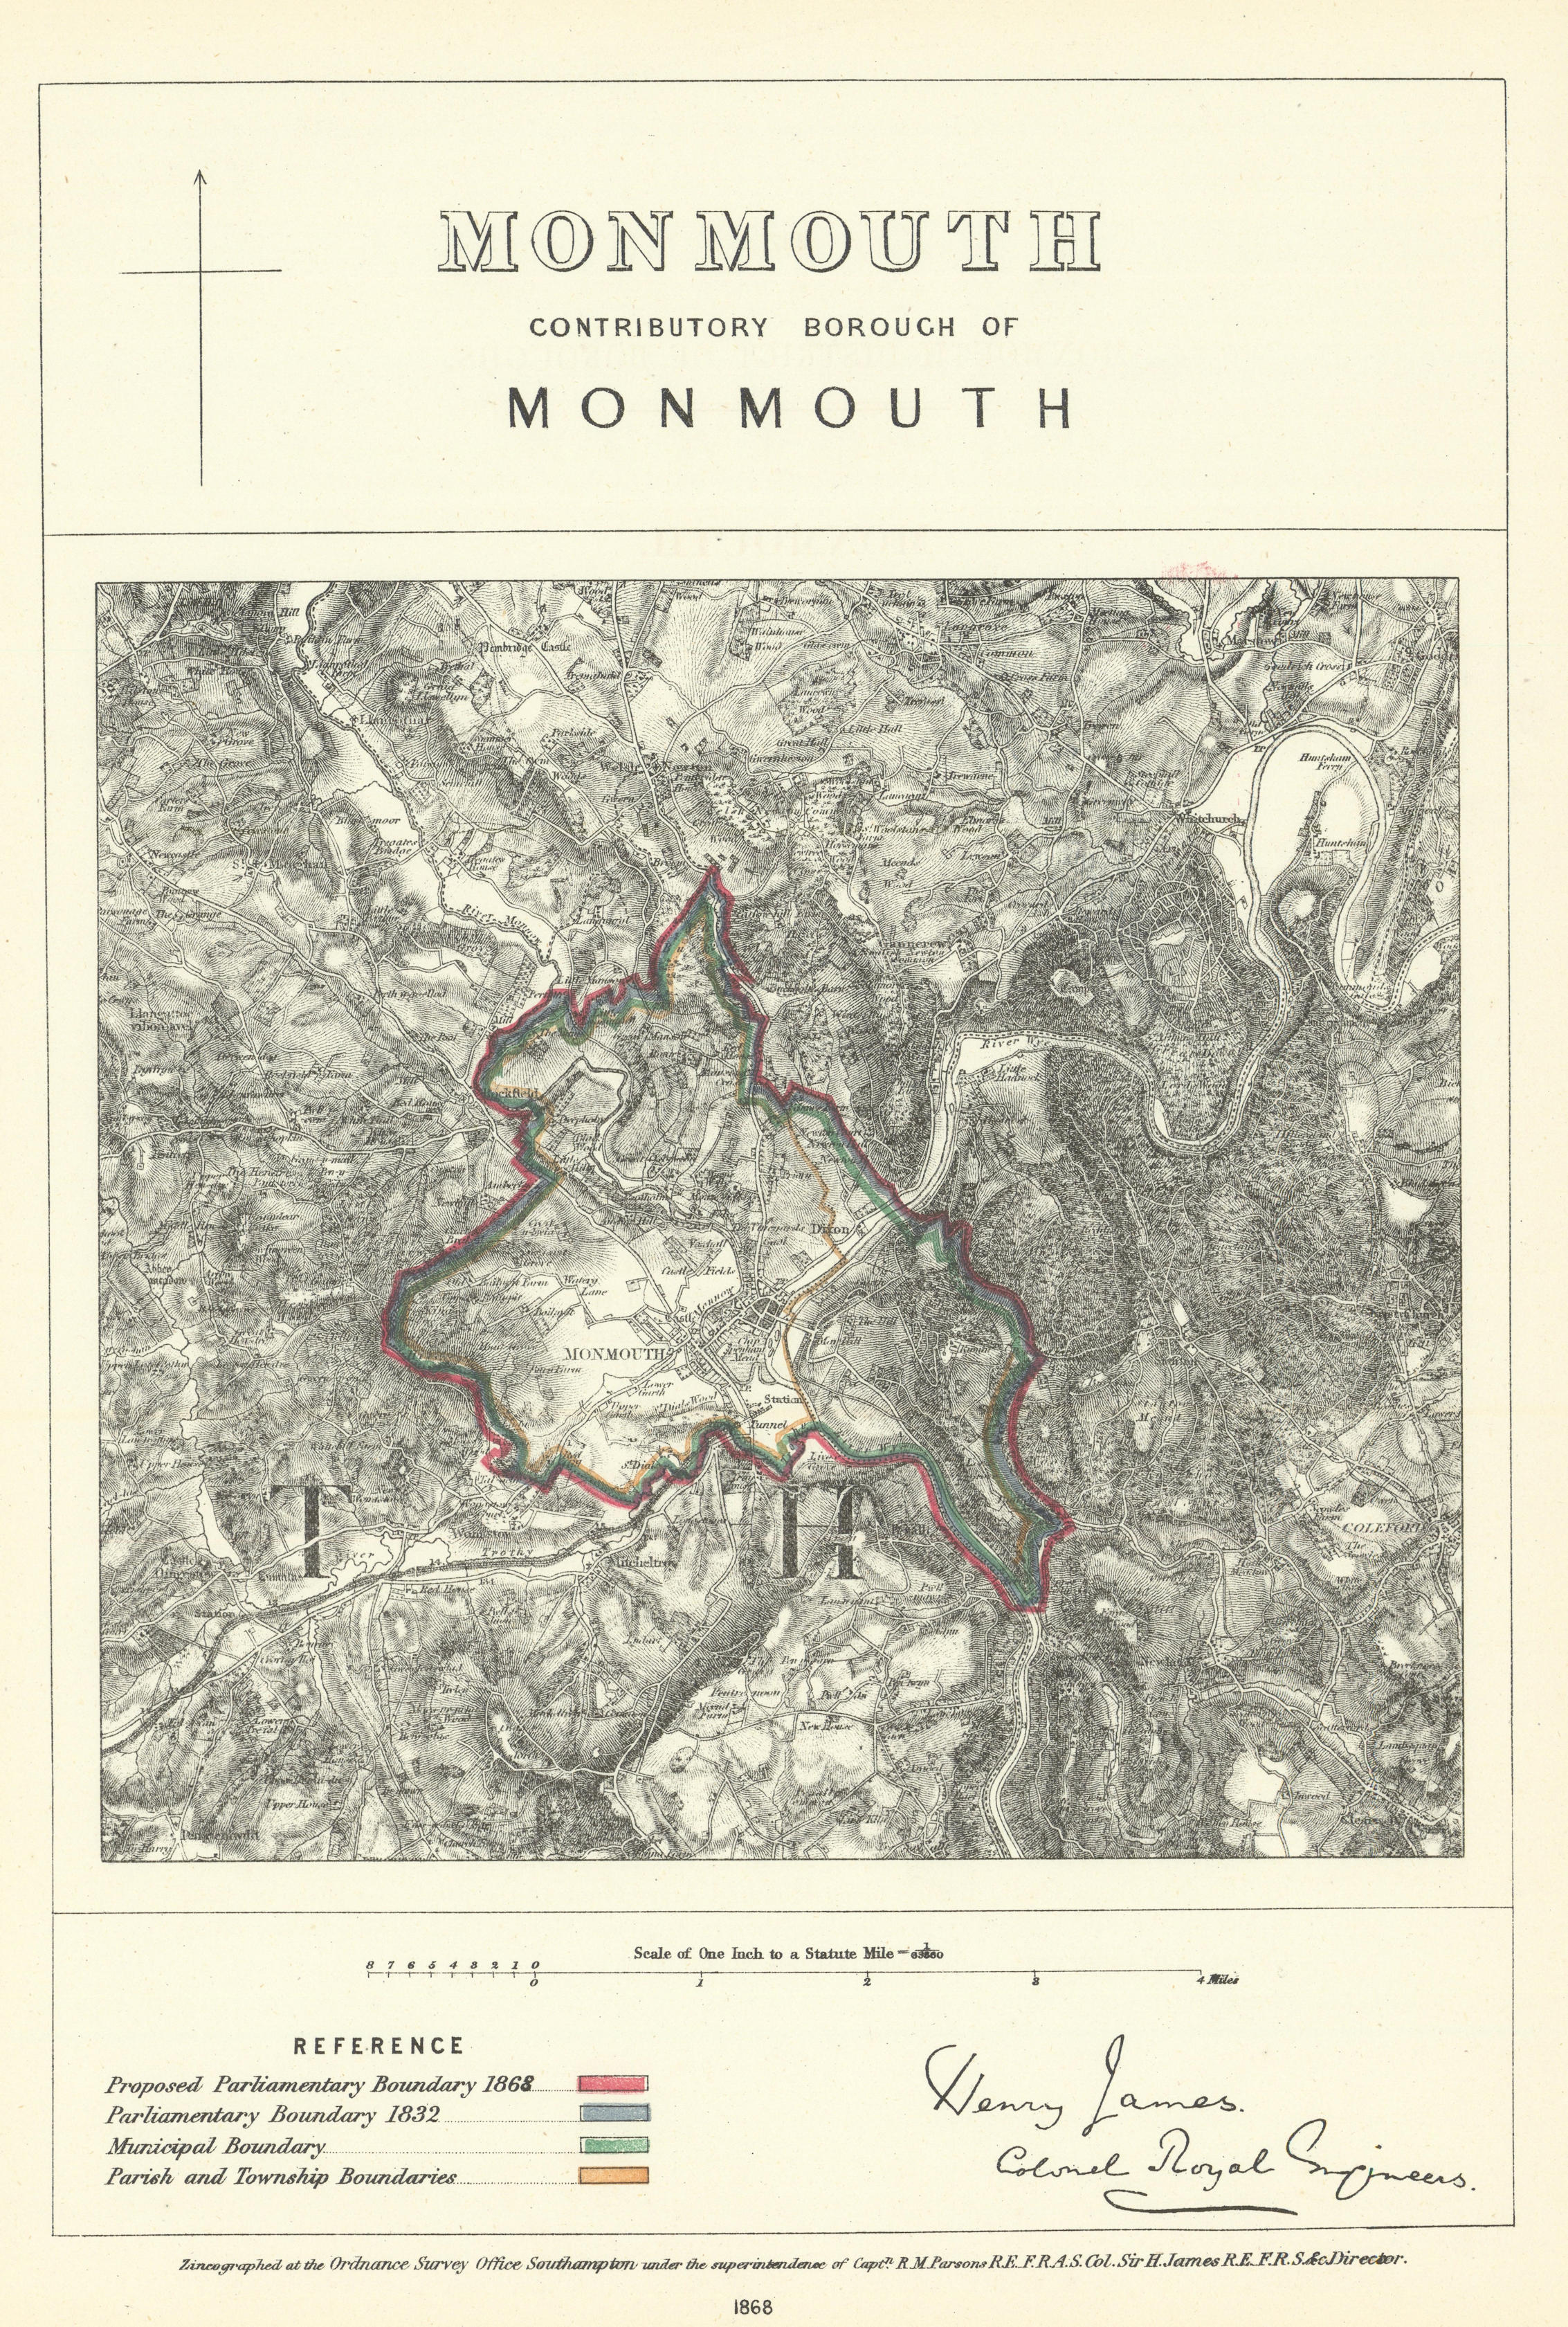 Associate Product Monmouth Contributory Borough of Monmouth. JAMES. Boundary Commission 1868 map